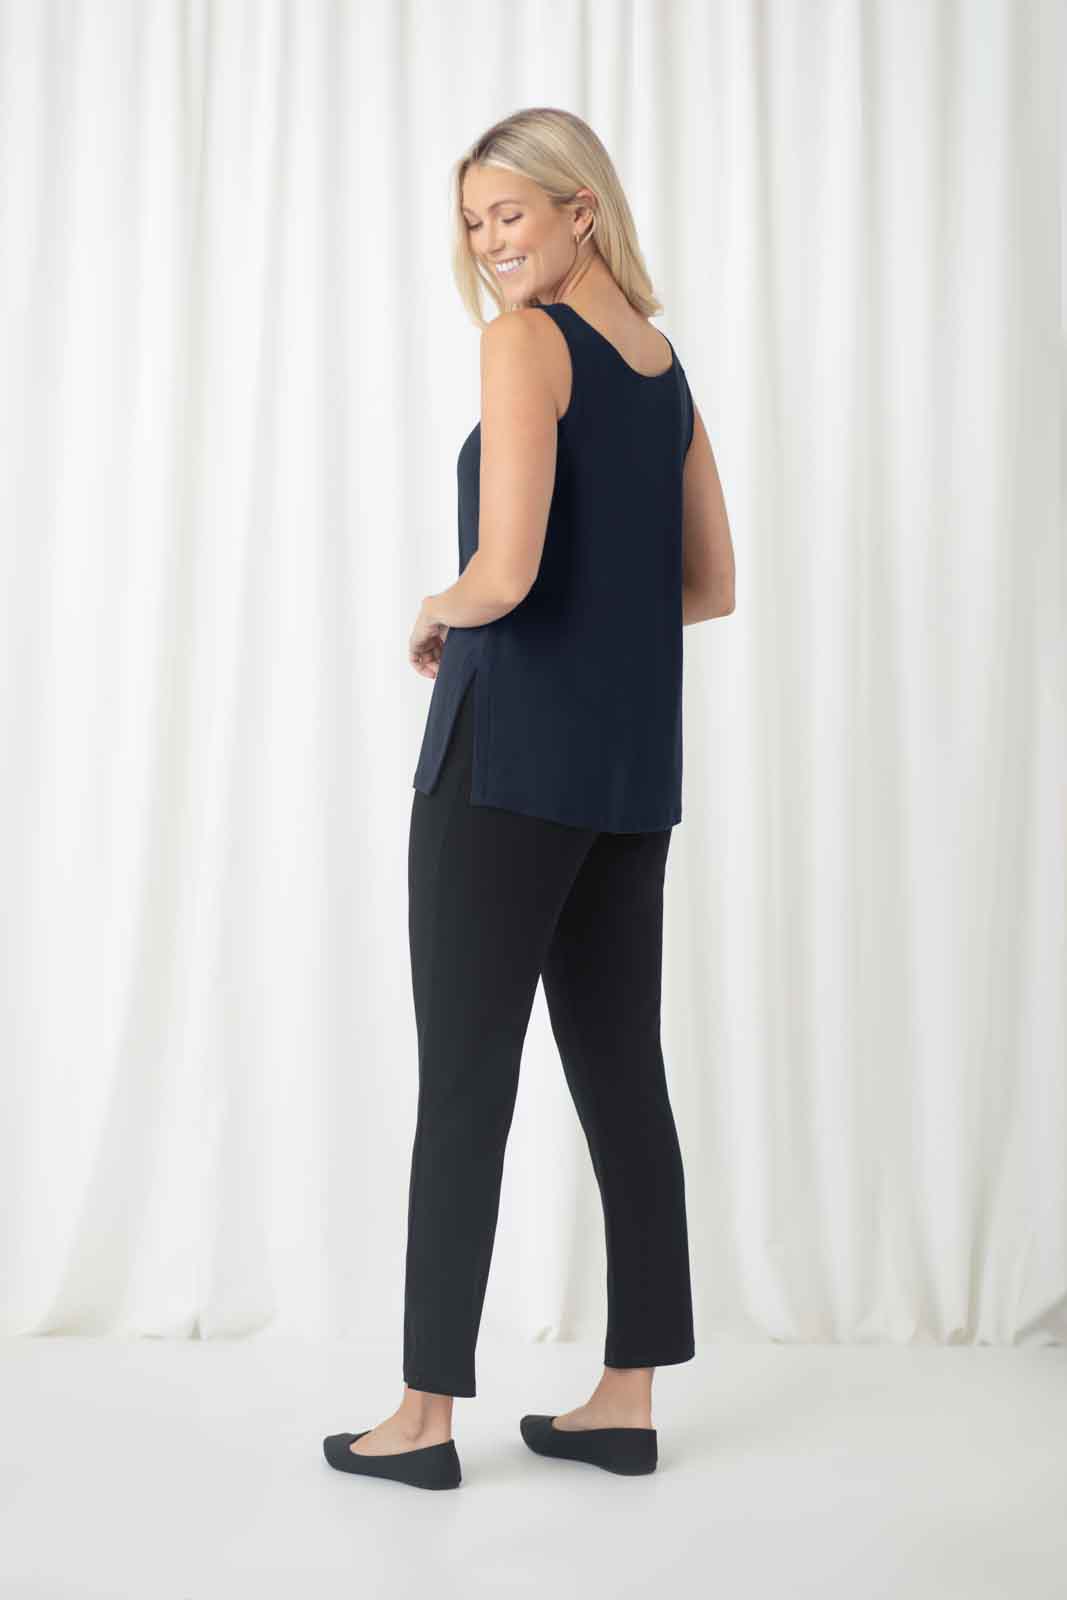 Sympli Go To Tank Relax, Navy - Statement Boutique